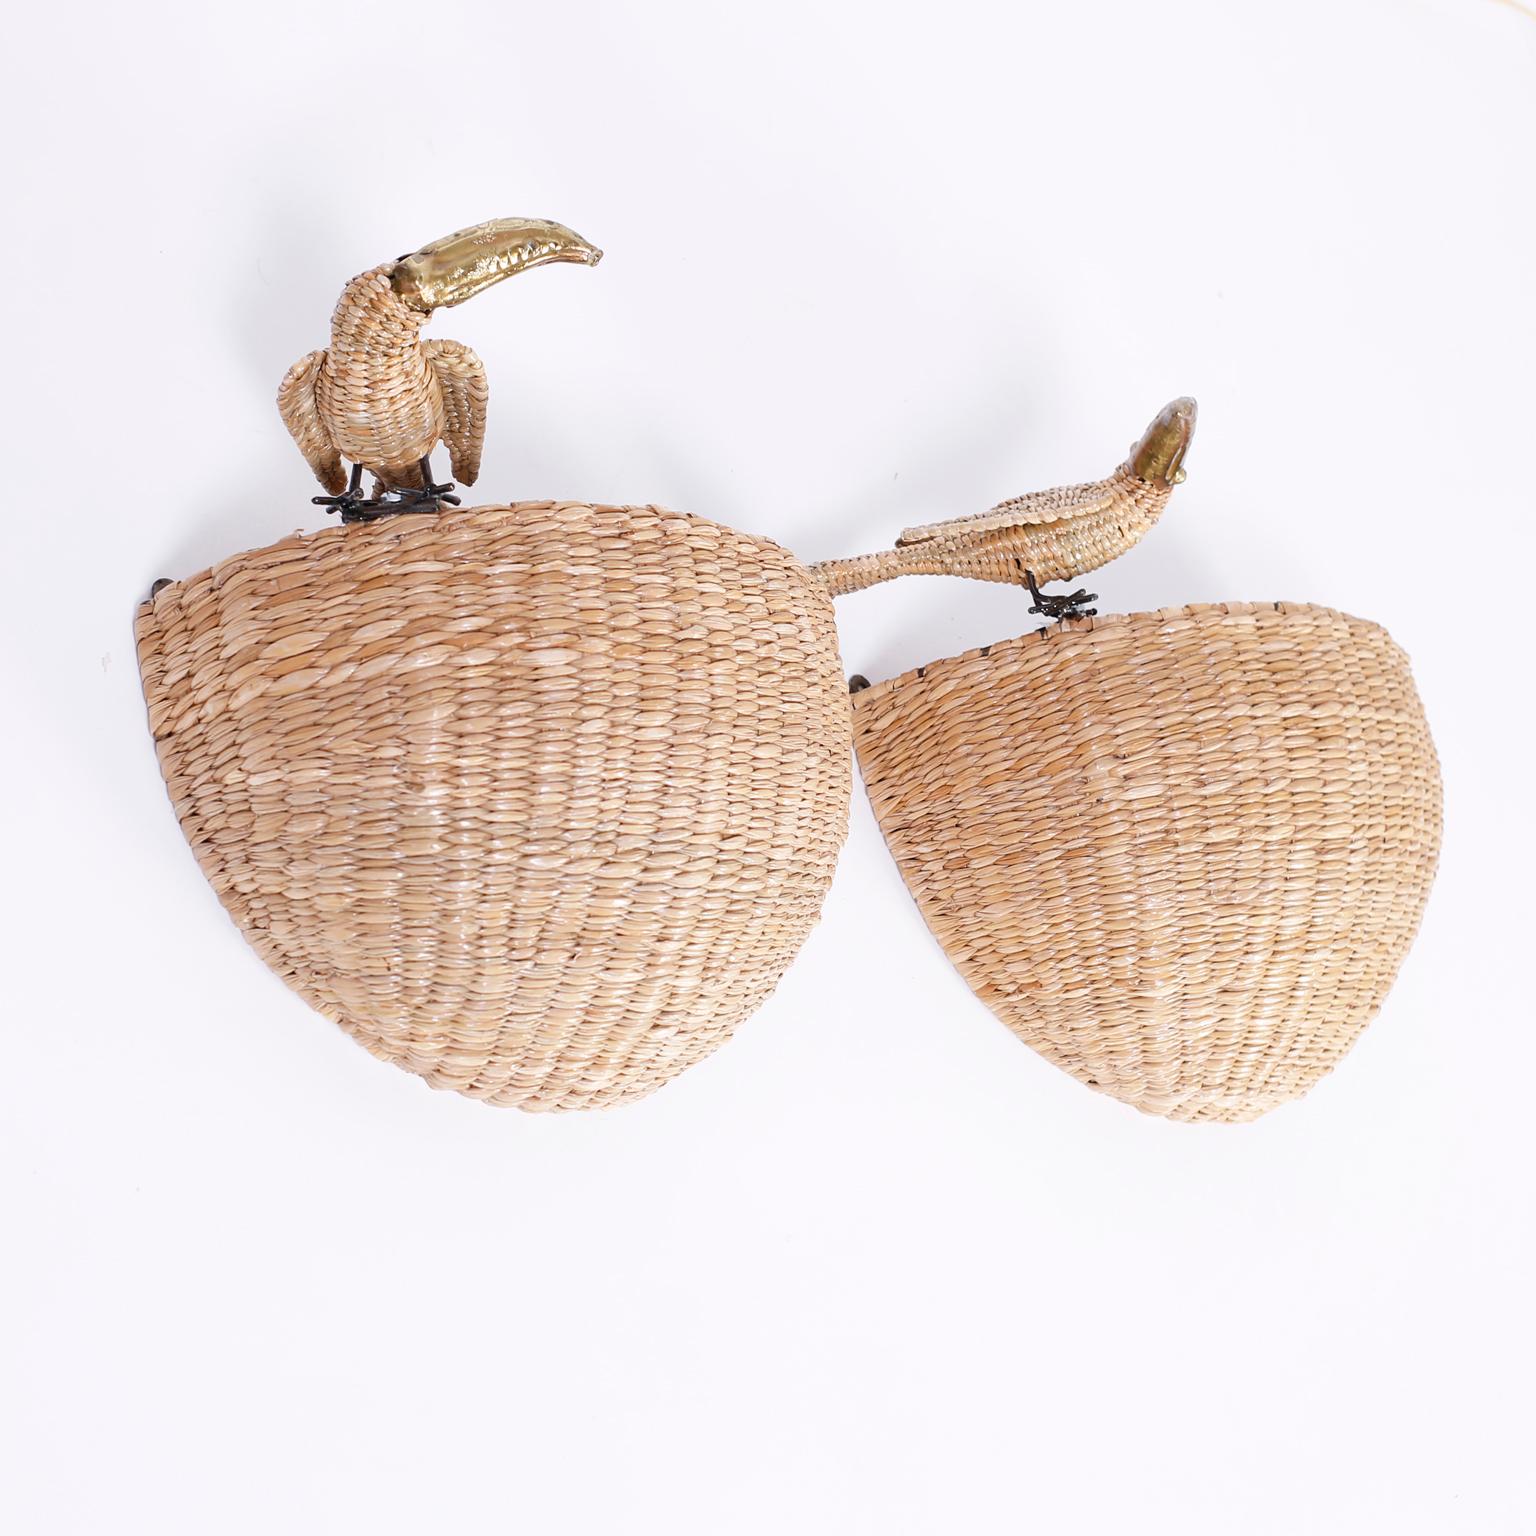 Whimsical wall sconces or torchiere crafted with a metal frame wrapped in reed and having toucans perched at the tops with brass beaks.